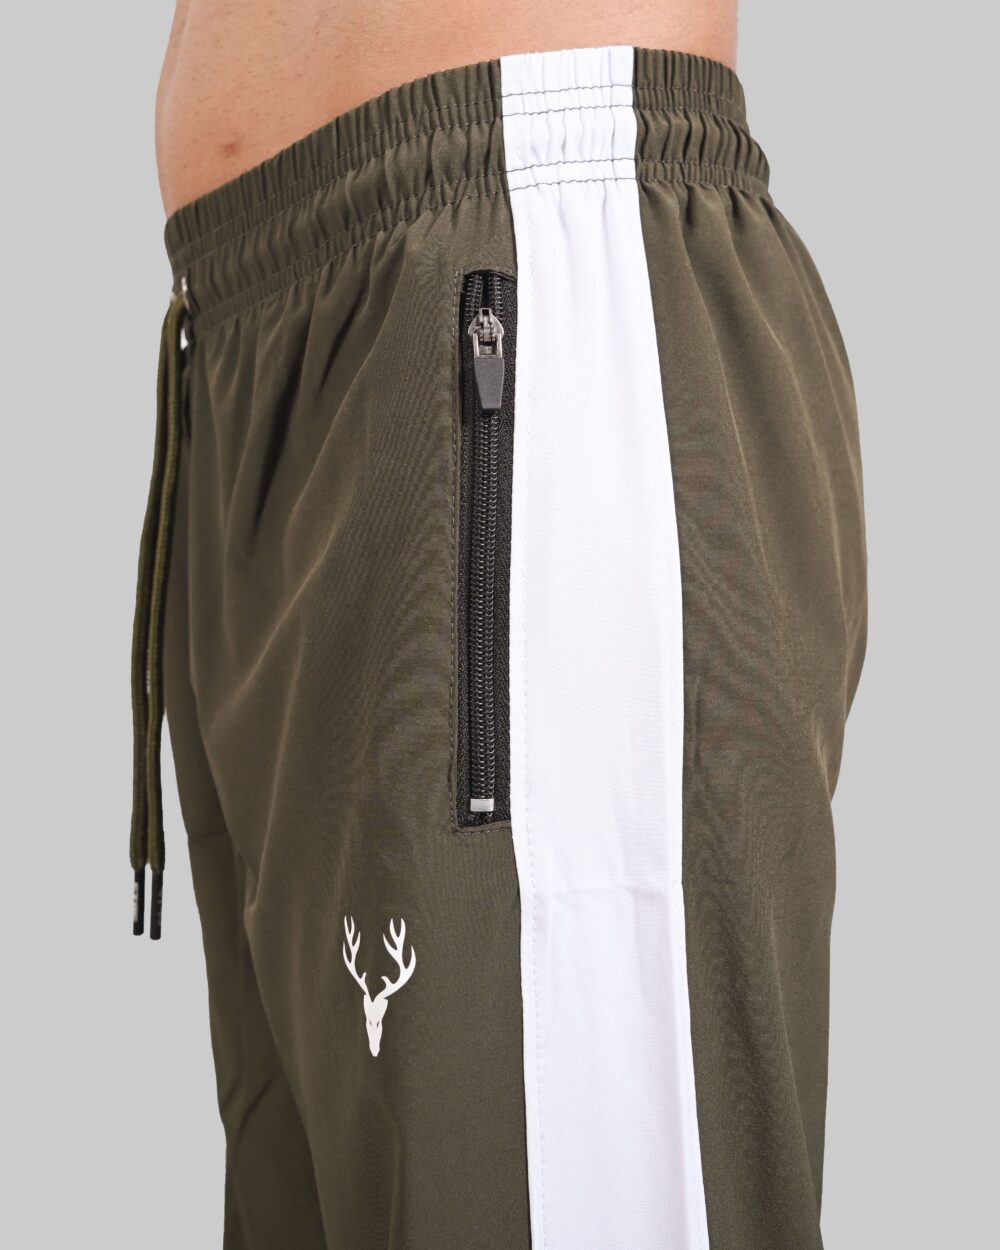 SG Loose Fit Trouser 3.0 (OLIVE & WHITE) - Stag Clothing